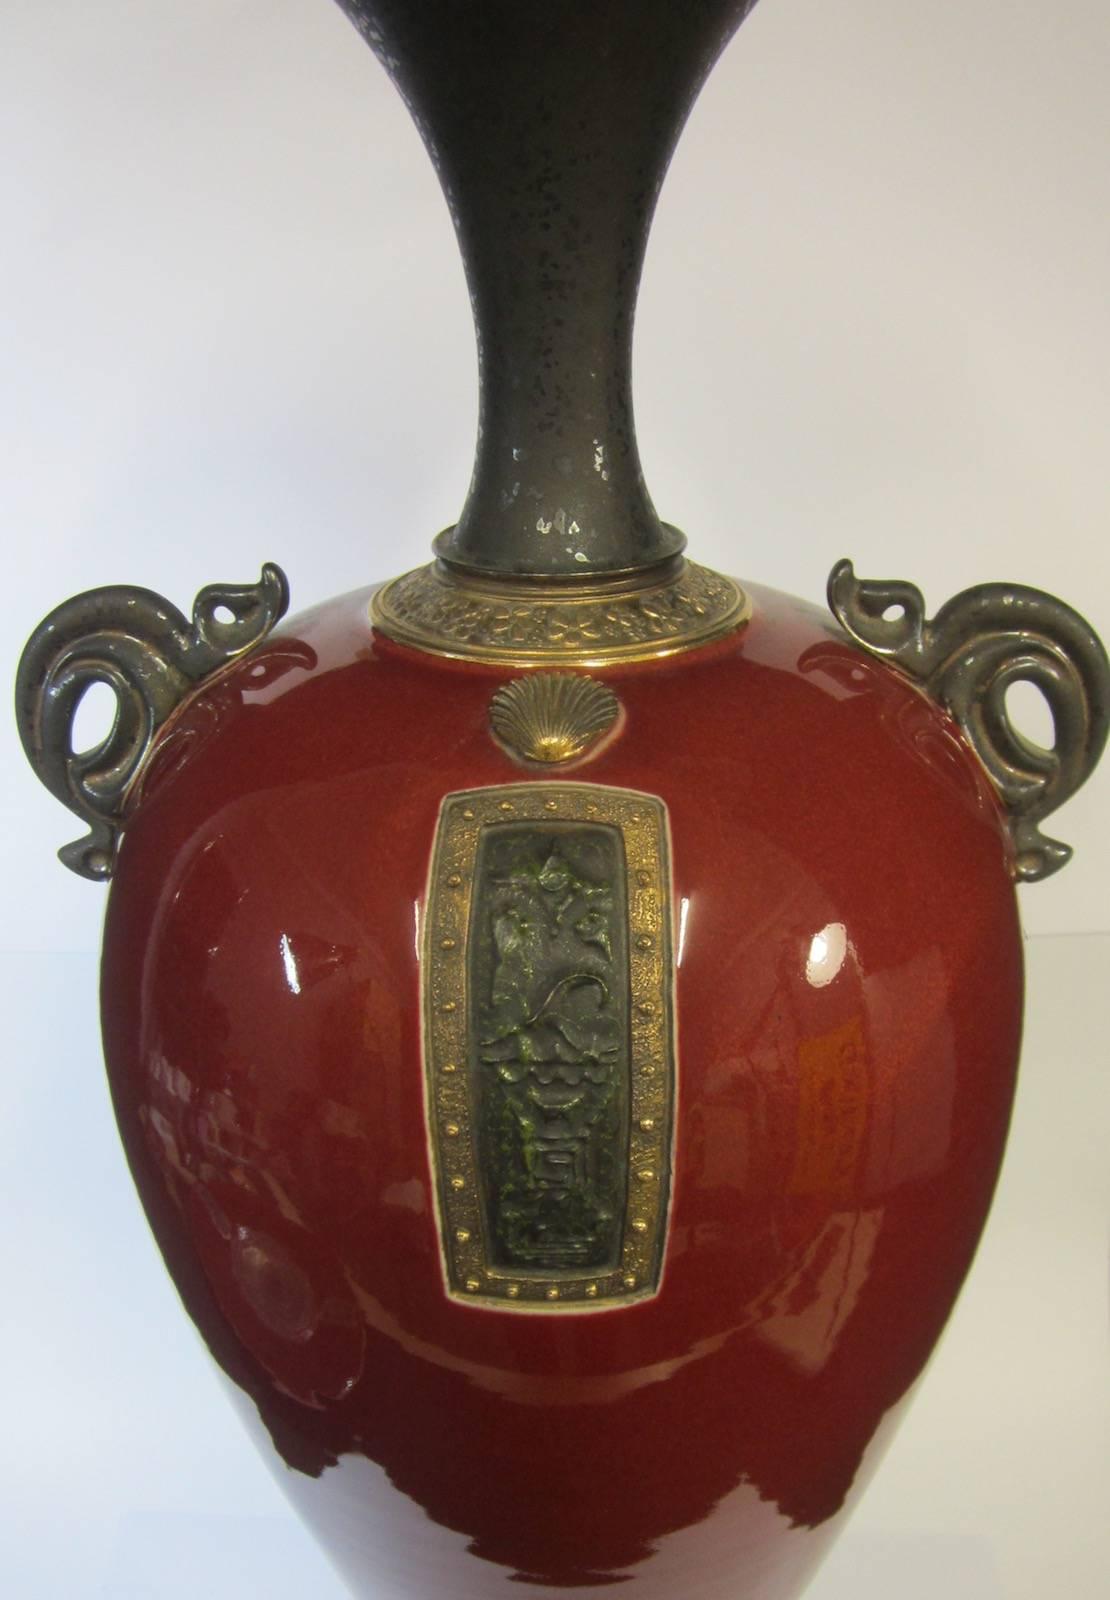 David Oswald 'ceramic artisan' handmade urn,
circa 1995,
This piece is believed to be a trial piece and is not numbered and has no COA.
Measures: 24 x 65cm high
David Oswald (self described 'ceramic artisan') was born in Cairns, Northern